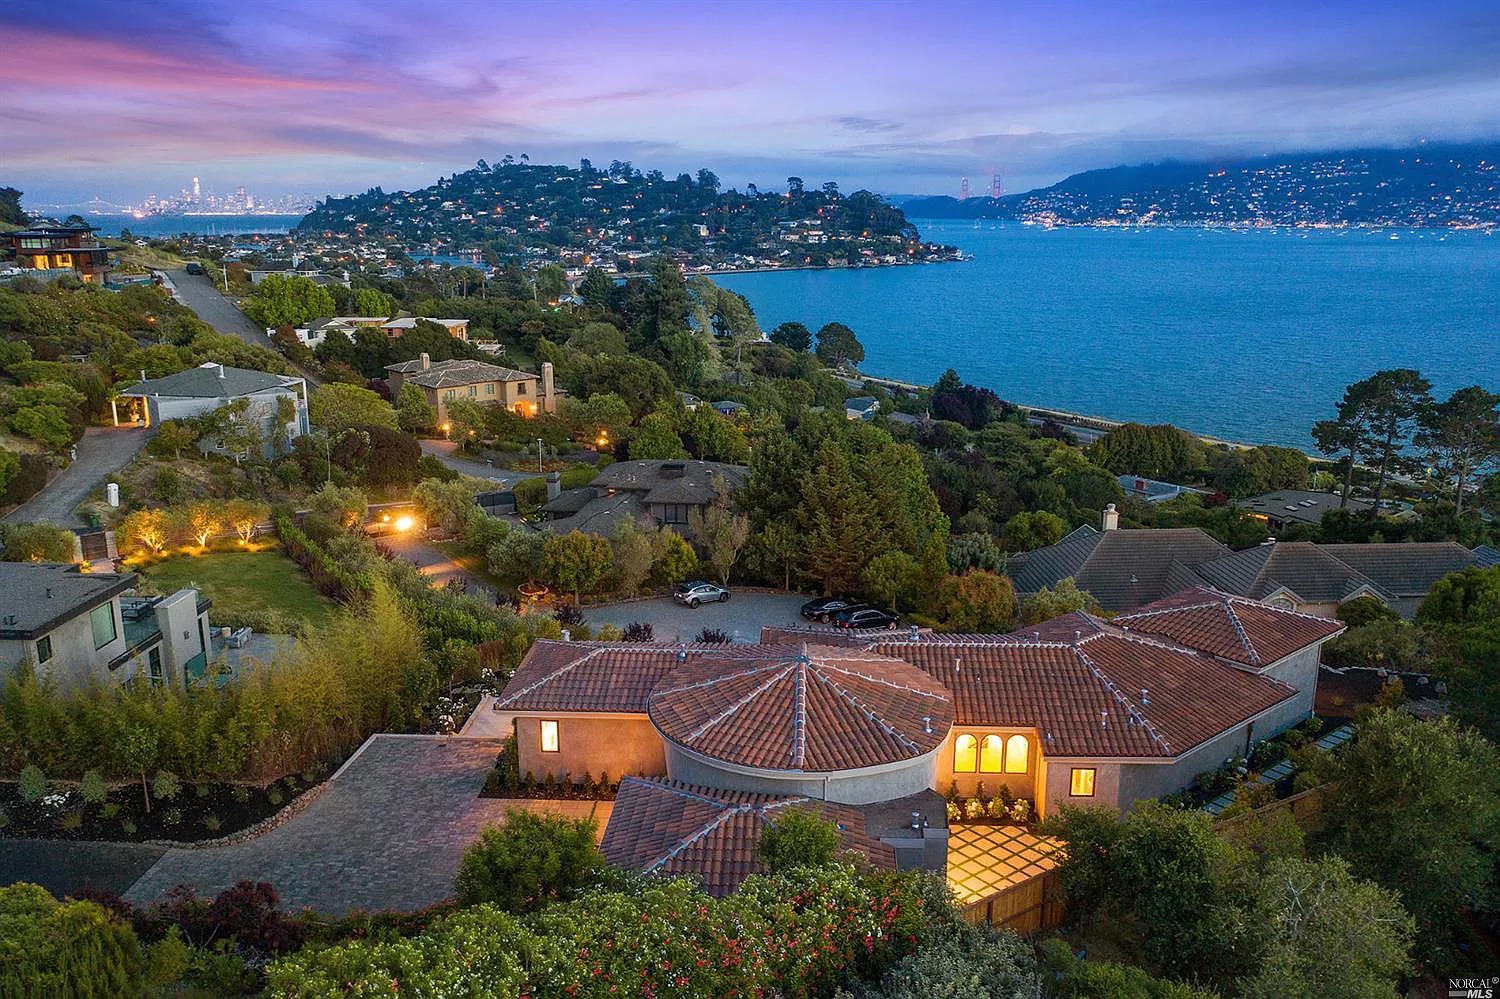 25 Gilmartin Dr, Belvedere Tiburon, CA 94920 - $8,995,000 home for sale, house images, photos and pics gallery